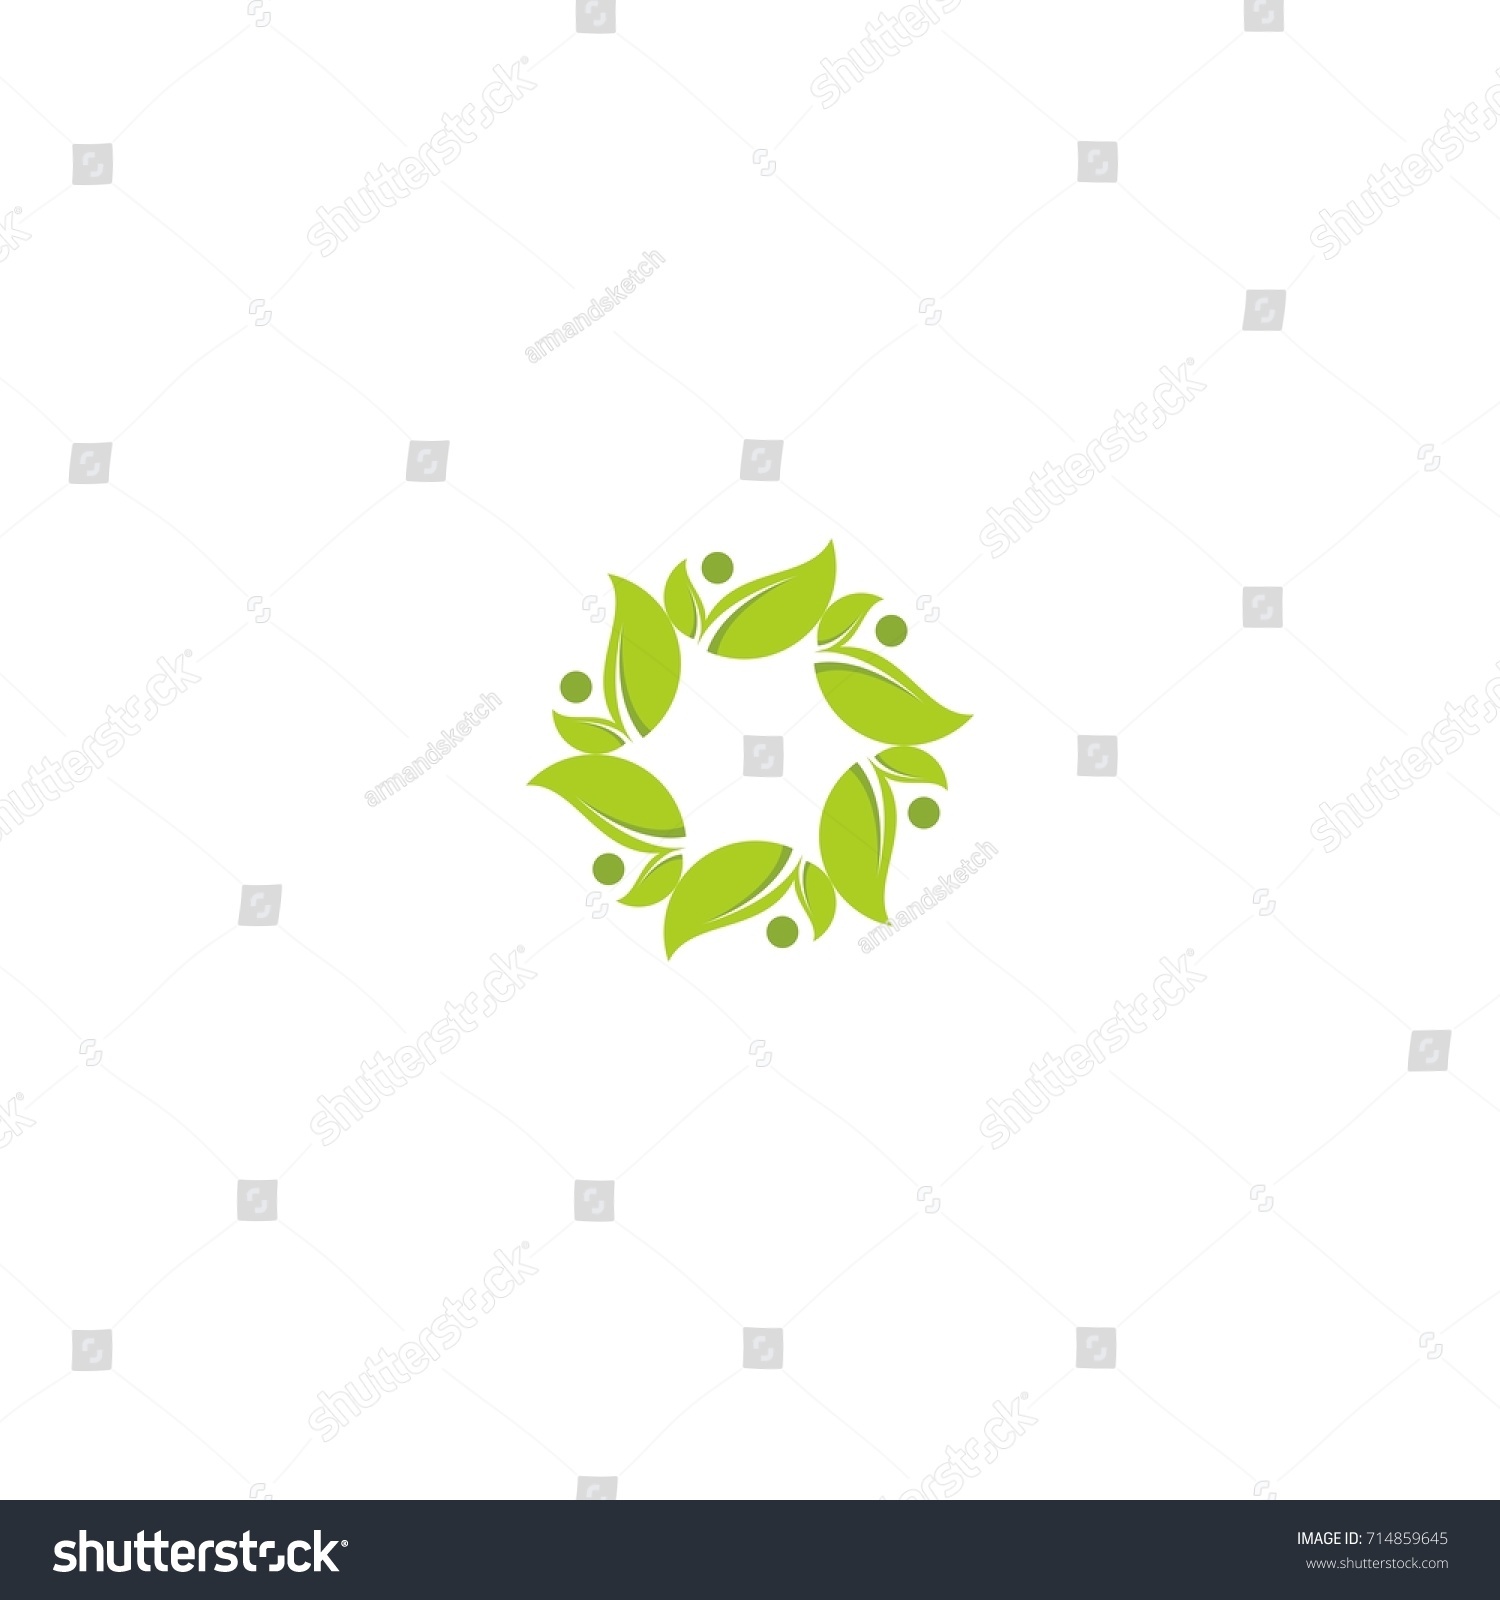 People Leaf Connection Logo Stock Vector Royalty Free Shutterstock